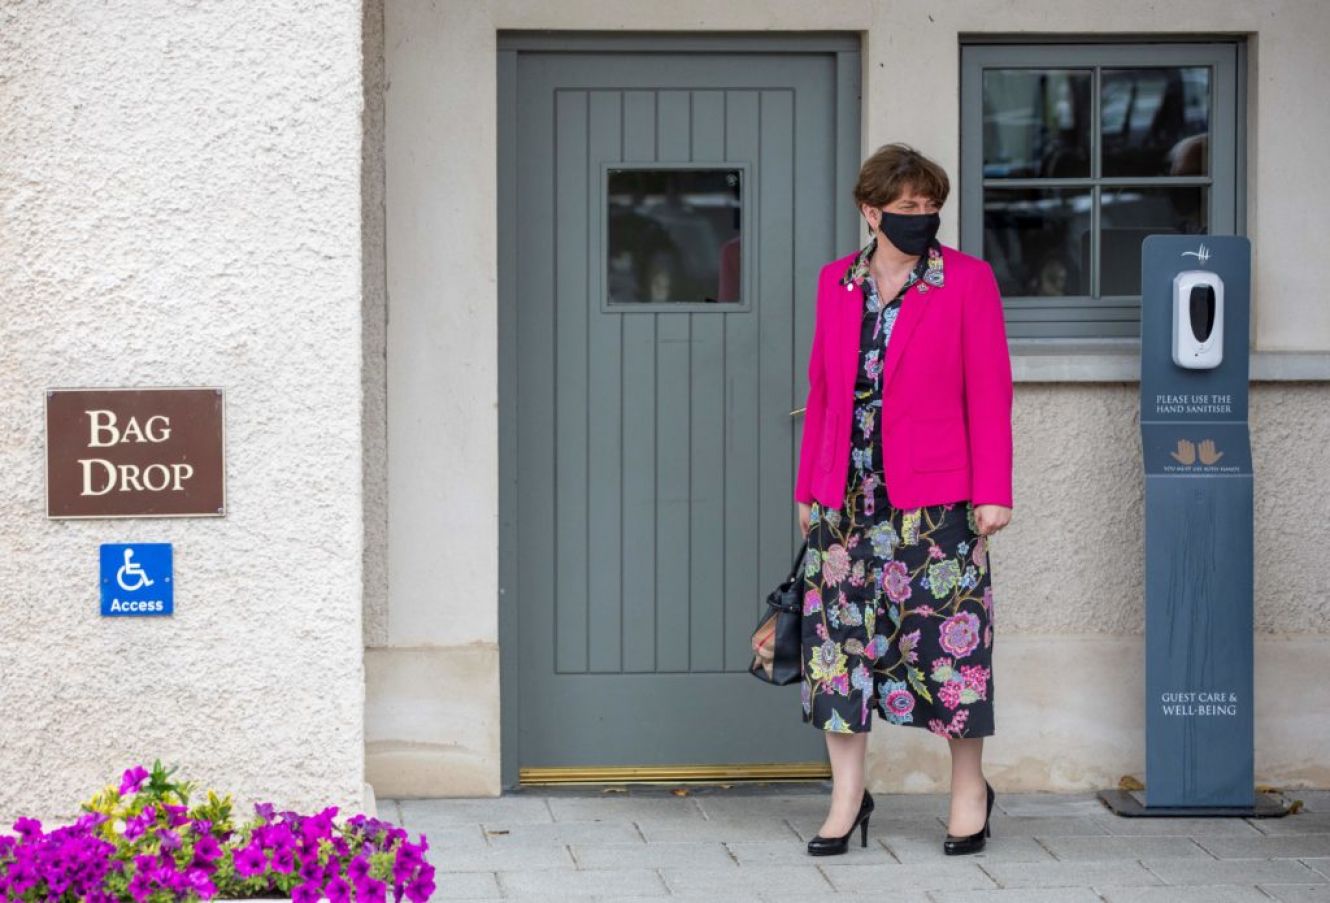 Arlene Foster After A Meeting Of The British-Irish Council At The Lough Erne Resort In Enniskillen, Co Fermanagh. The Meeting On June 11Th Was Foster's Last As Northern Ireland First Minister. Photo: Paul Faith/Afp Via Getty